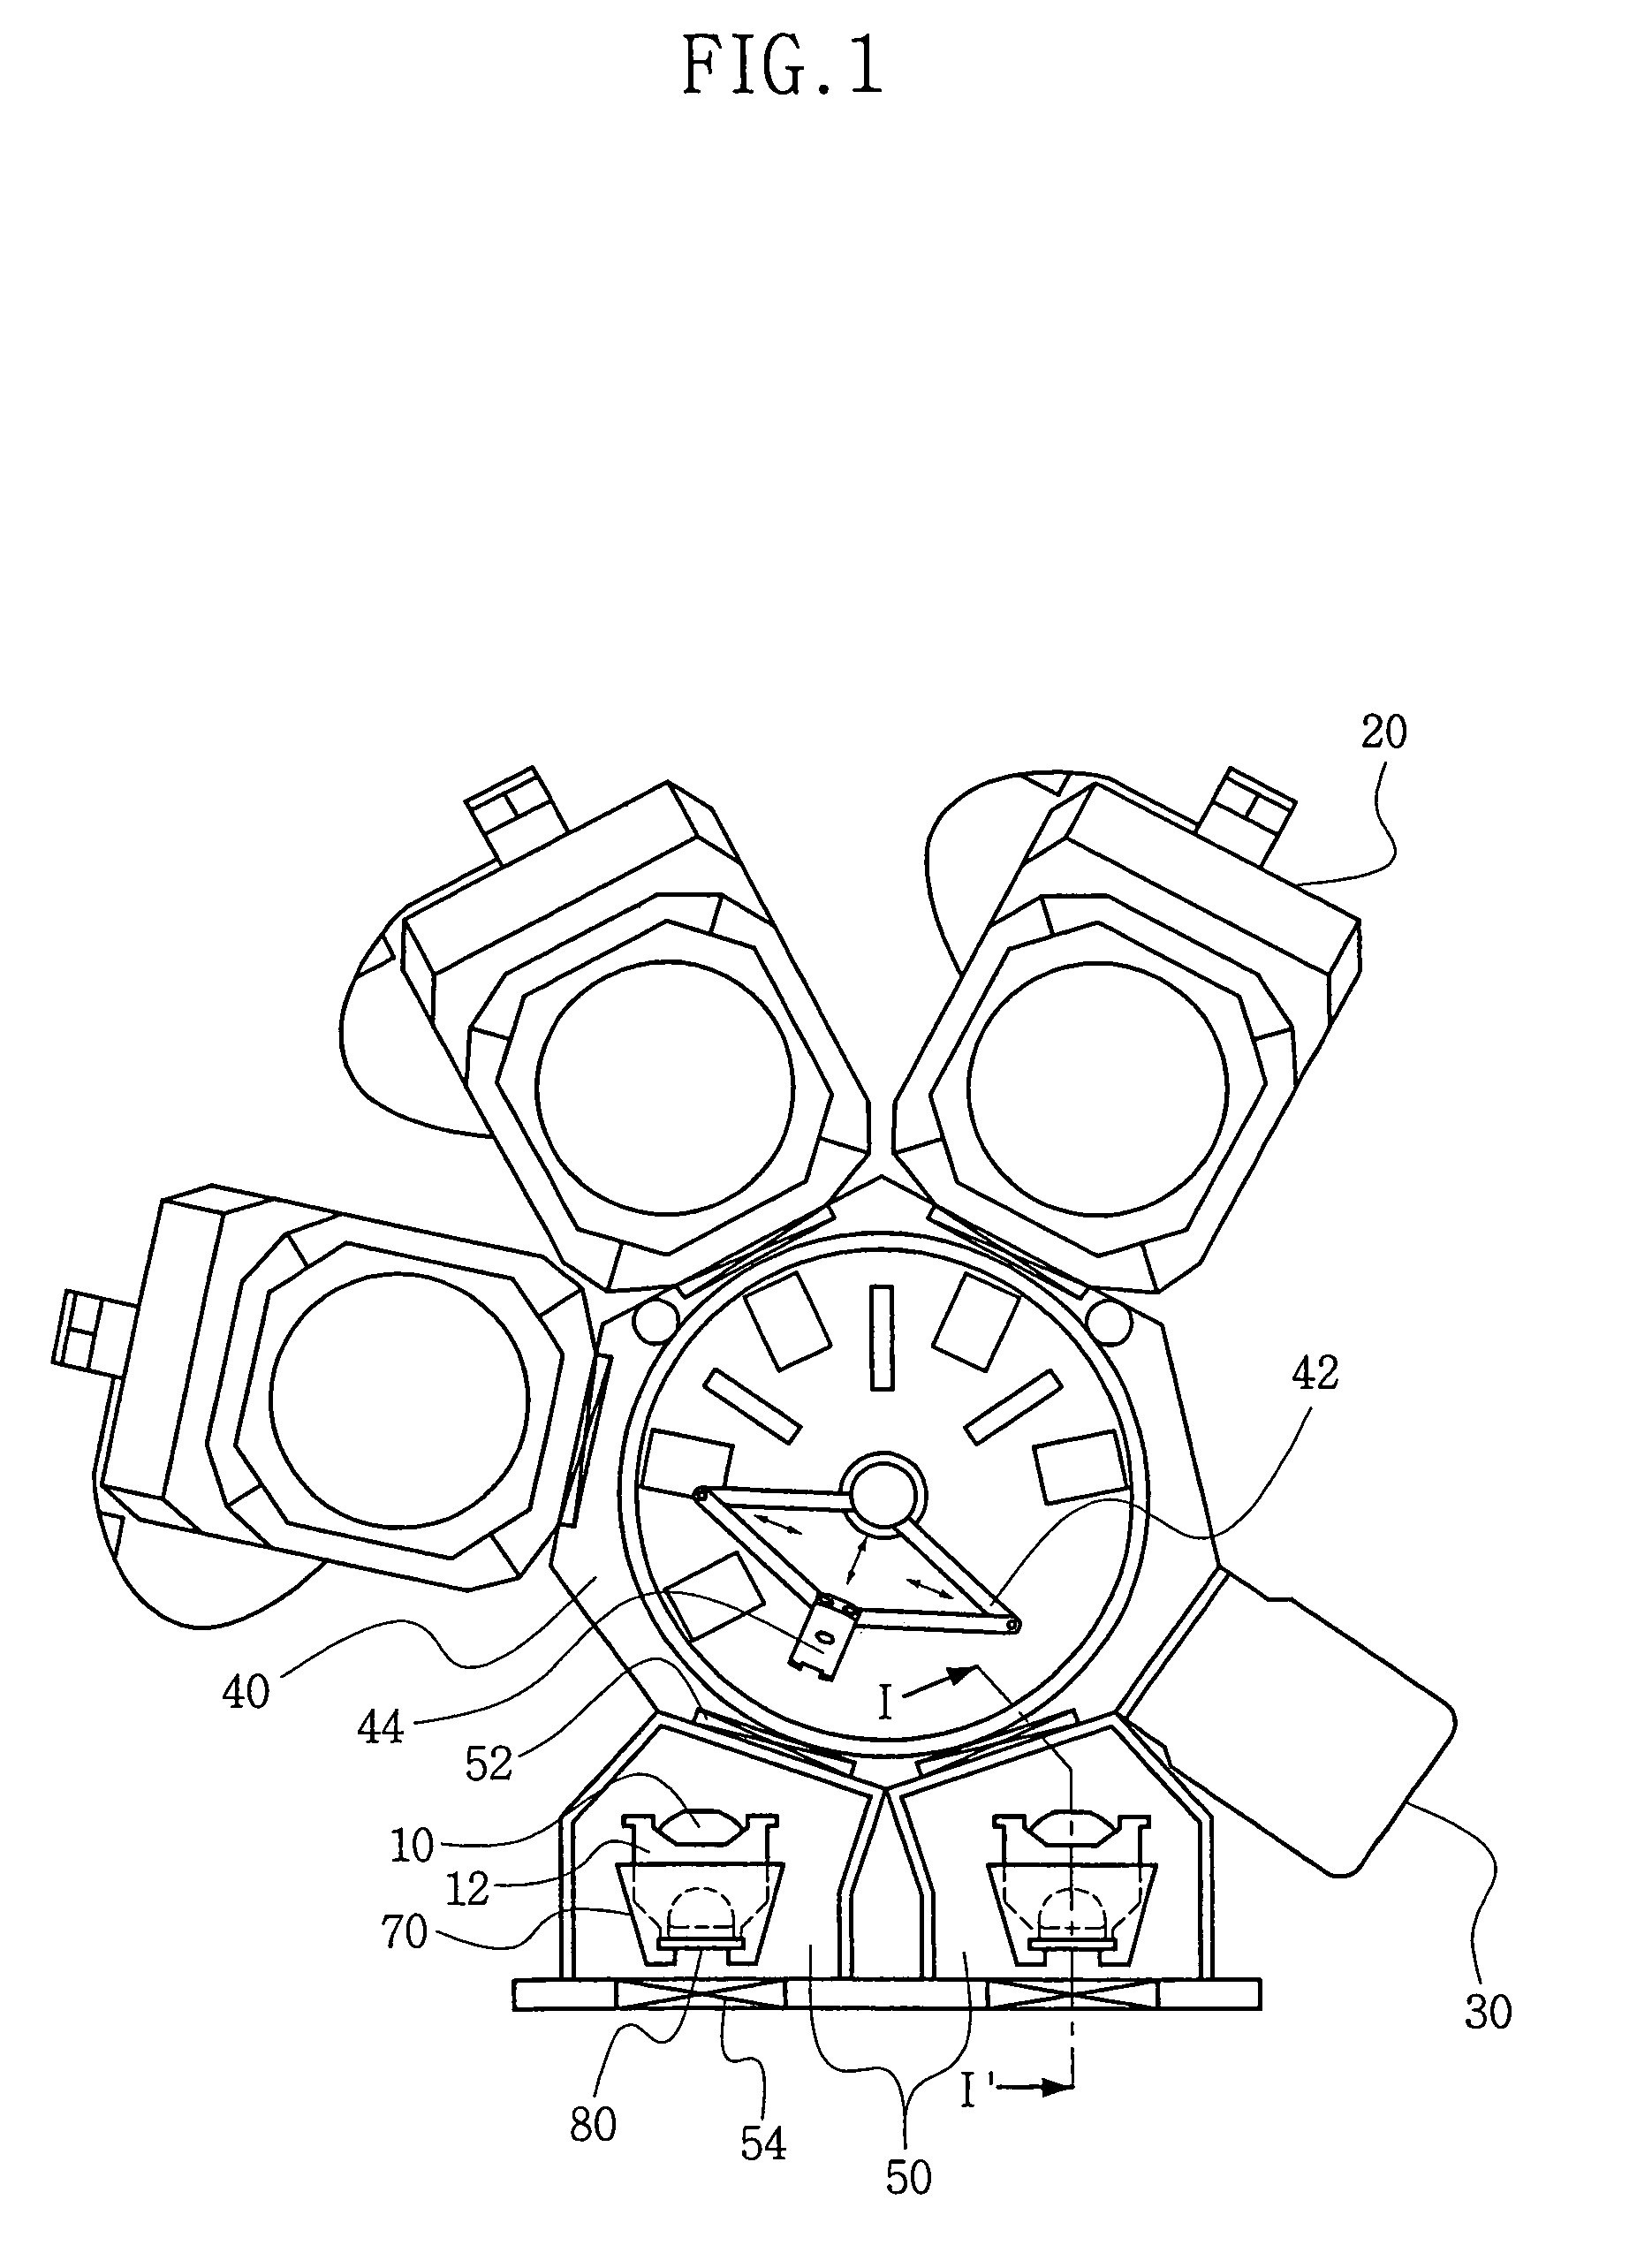 Load-lock and semiconductor device manufacturing equipment comprising the same